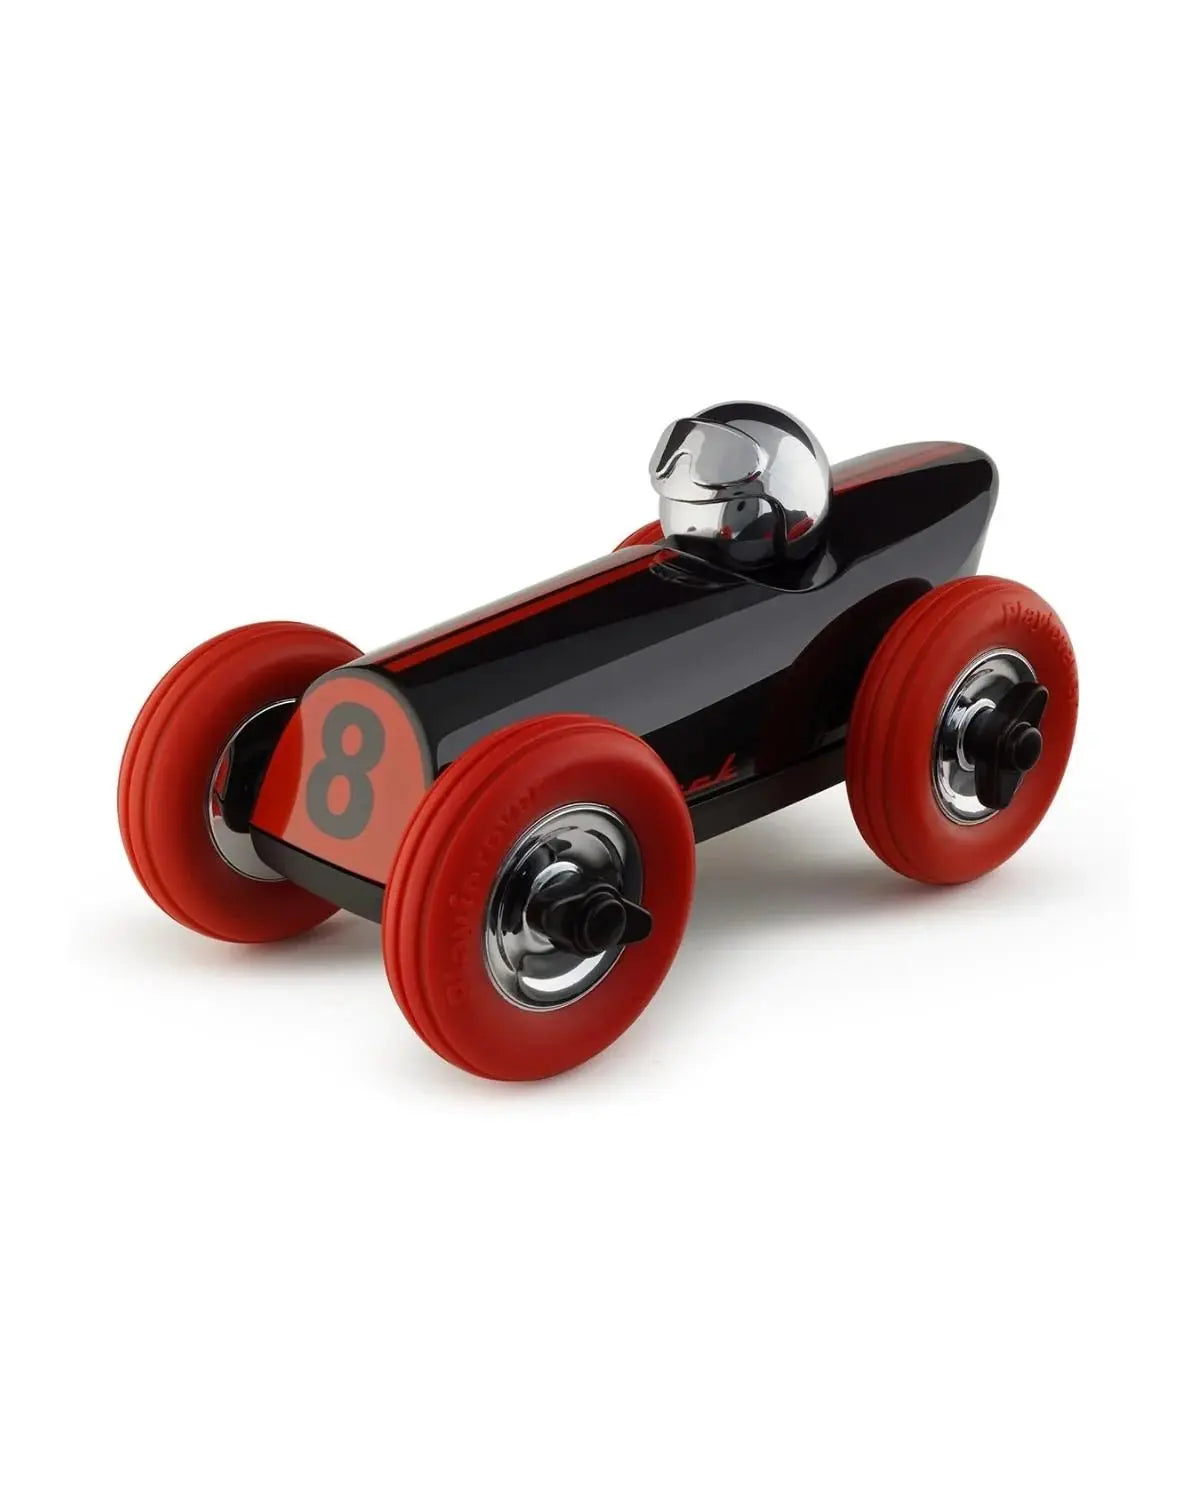 Dark Orange Car Verve Malibu, Wide Profile Design, Low-to-the-Ground Rubber Tyres, Collectible Toy Car  Playforever Black/Red  